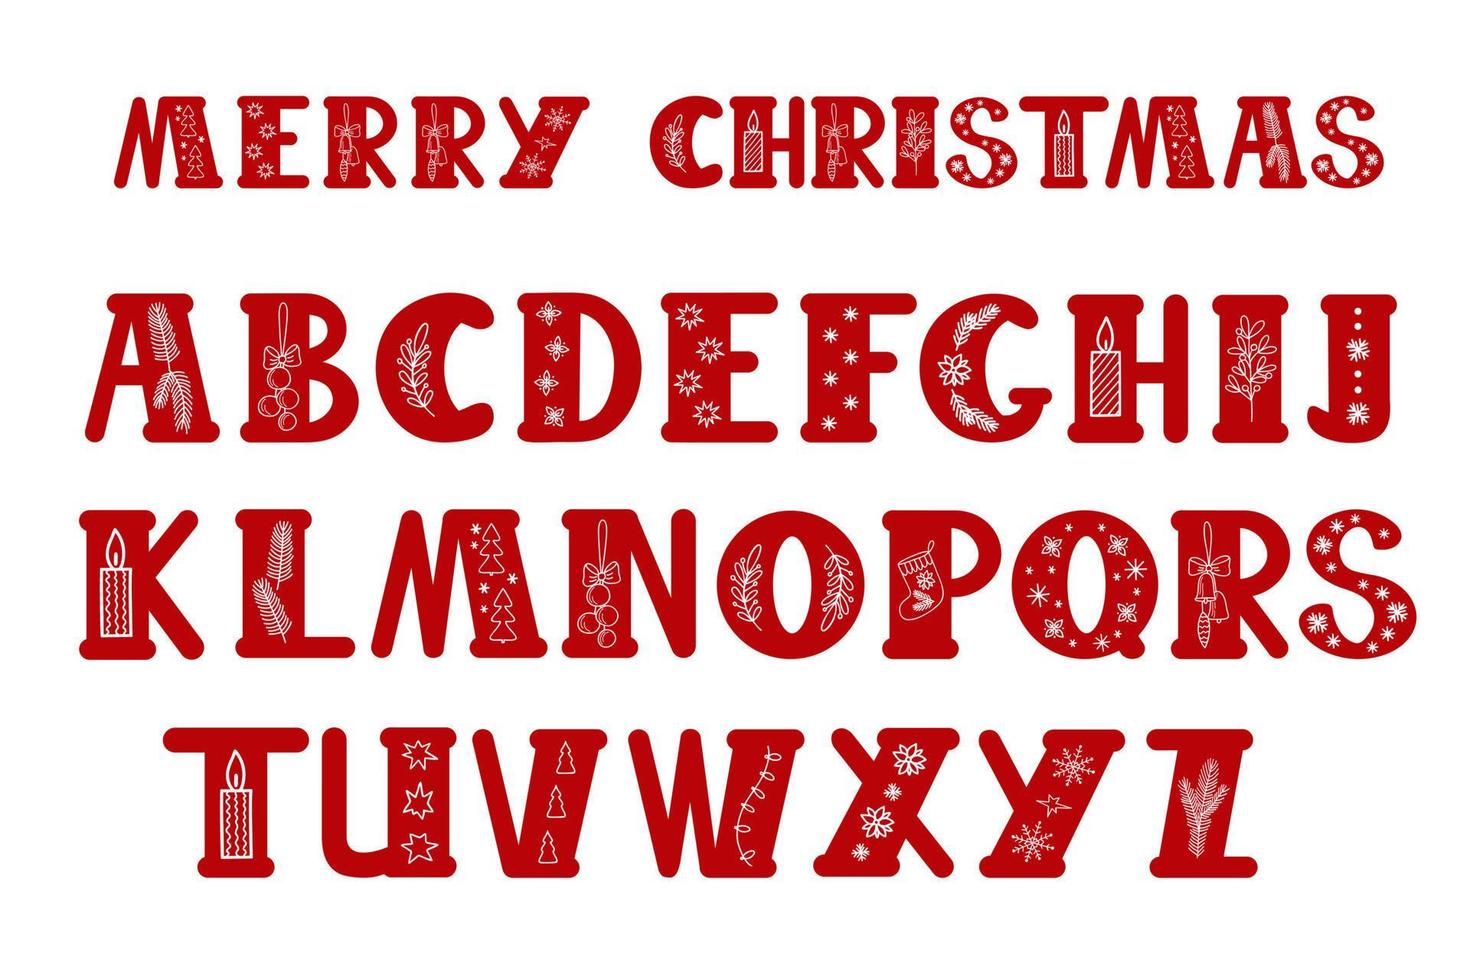 Capital red decorated hand drawn letters of English alphabet Christmas doodle style vector illustration, calligraphic abc, cute funny handwriting, cartoon and lettering